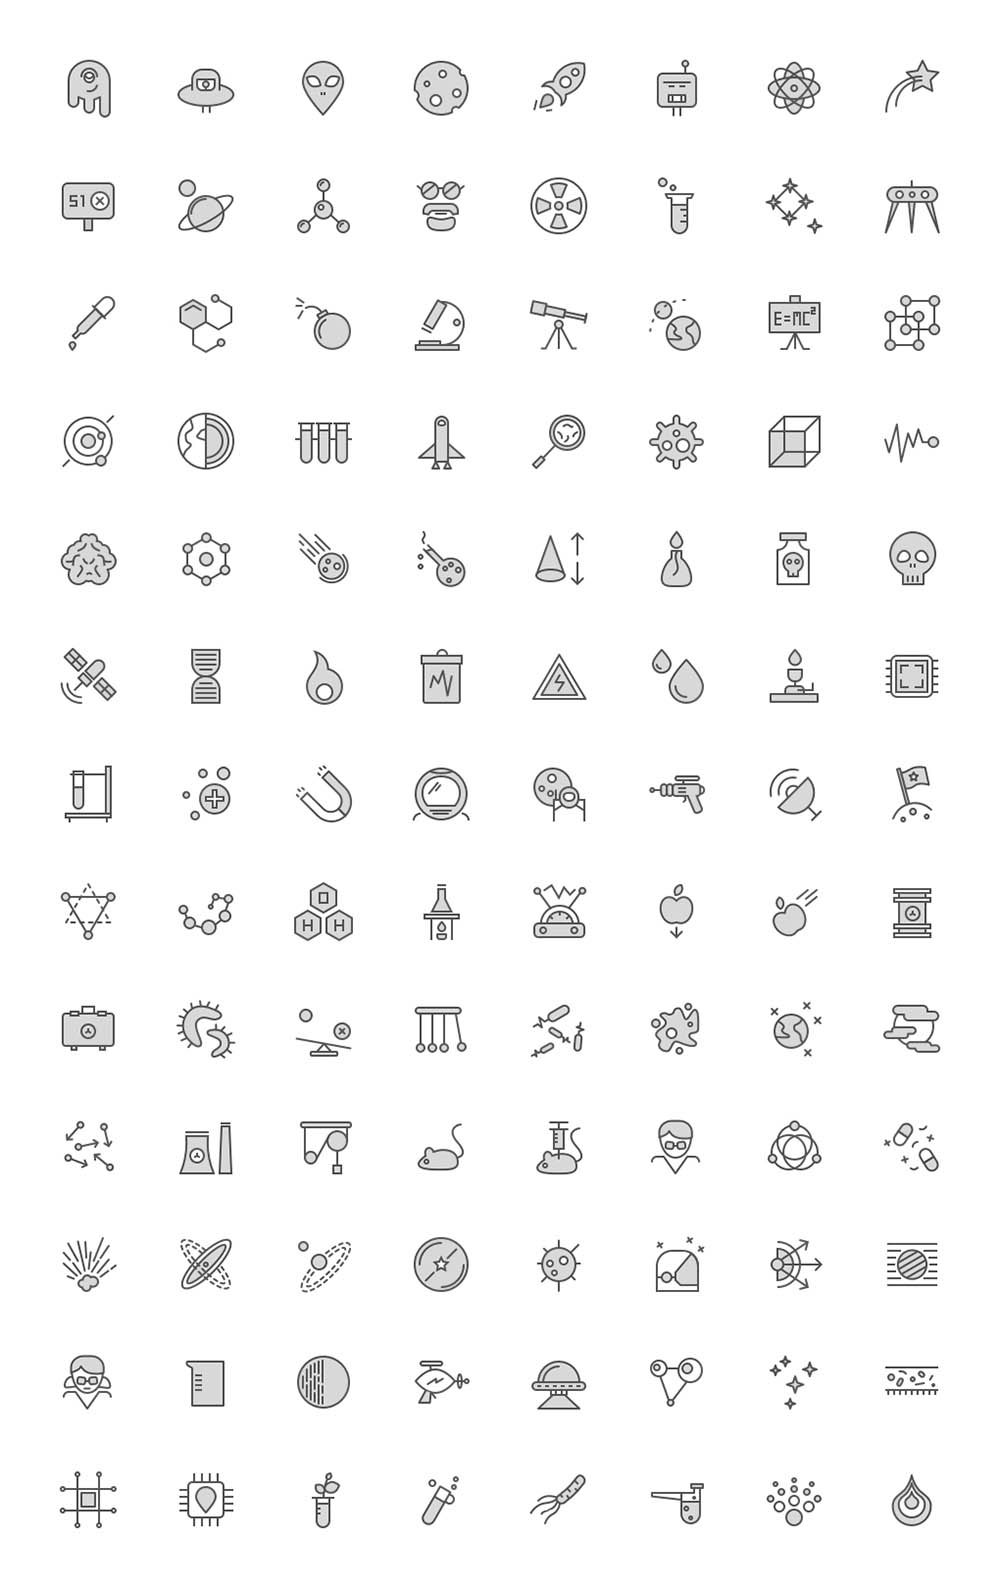 Free Science Icons: 104 Icons In 3 Styles